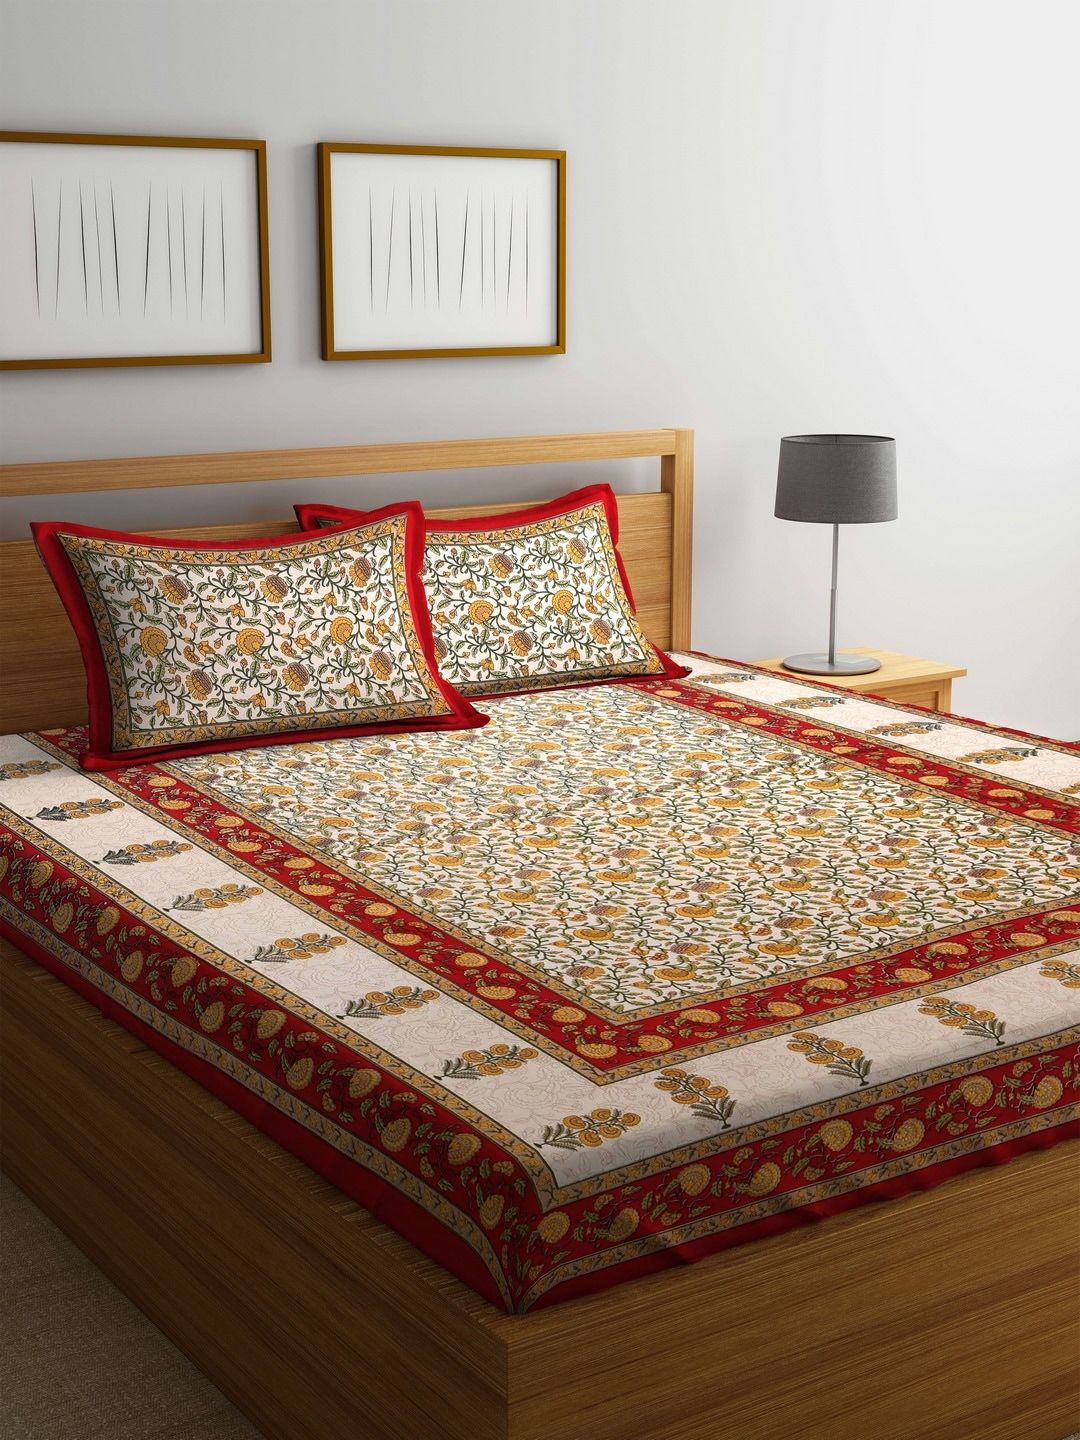 Rajasthan Decor Off-White & Red Floral Flat 144 TC Cotton 1 King Bedsheet with 2 Pillow Covers Price in India